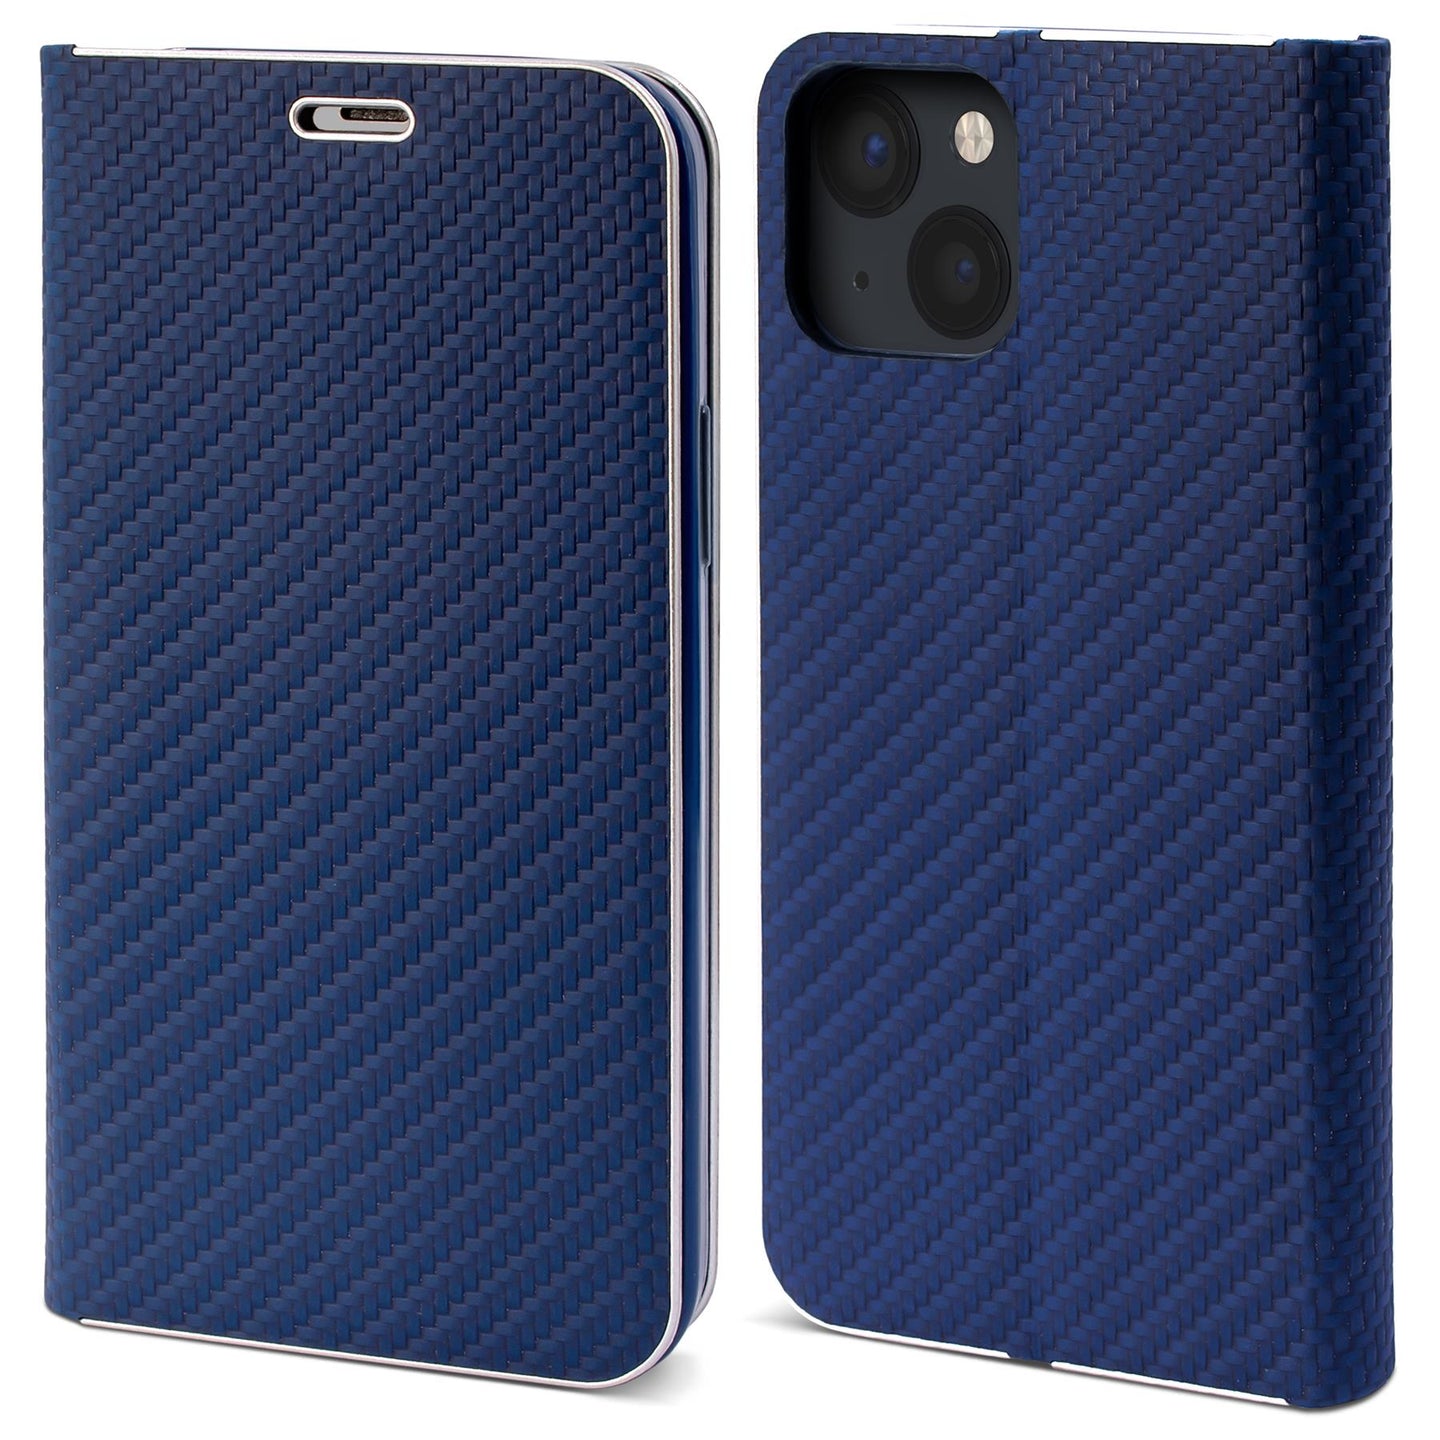 Moozy Wallet Case for iPhone 13 Mini, Dark Blue Carbon – Flip Case with Metallic Border Design Magnetic Closure Flip Cover with Card Holder